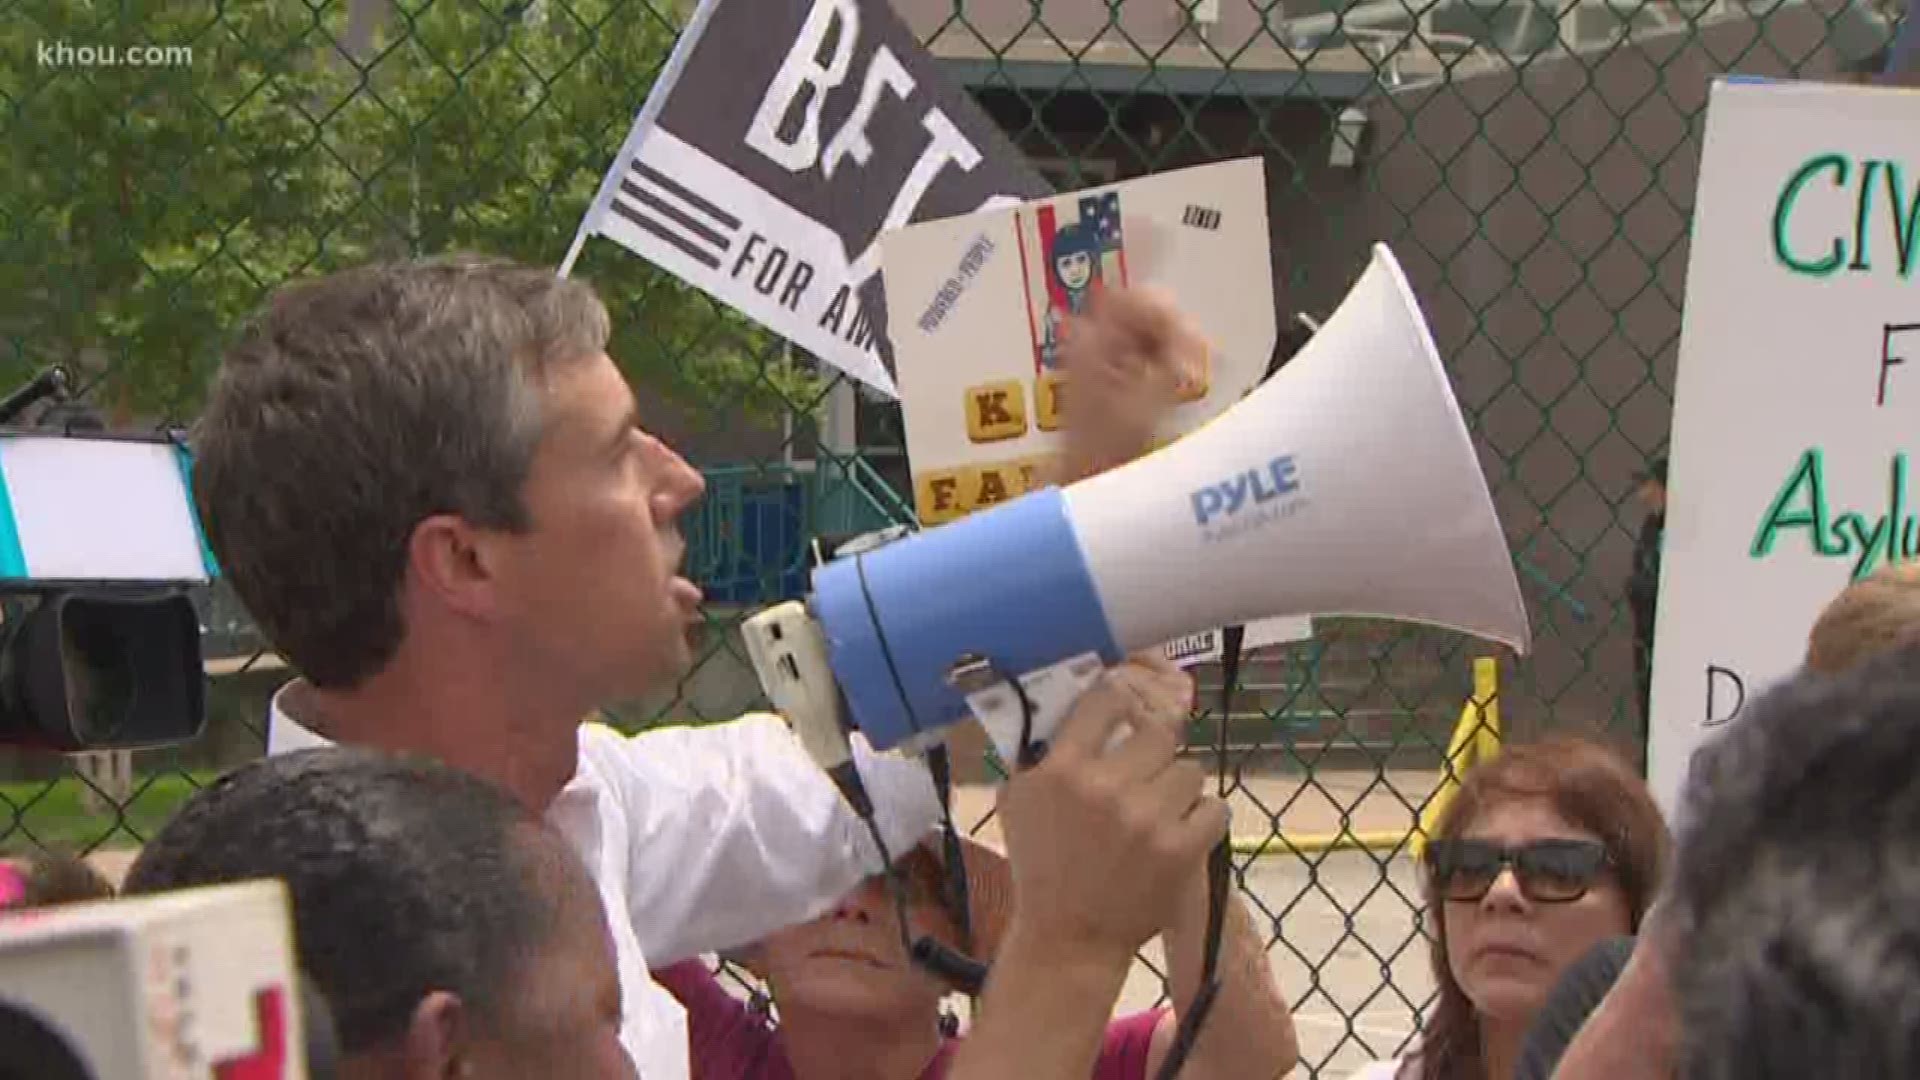 Democratic Presidential candidate Beto O’Rourke held a rally near downtown Houston Saturday afternoon in front of a controversial facility that houses unaccompanied migrant children. Casa Sunzal, run for Southwest Key Enterprises, a nonprofit, made headlines in 2018, when Houston Mayor Sylvester Turner tried to stop it from opening. It’s housed at the corner of Emancipation Ave and Prairie Street.